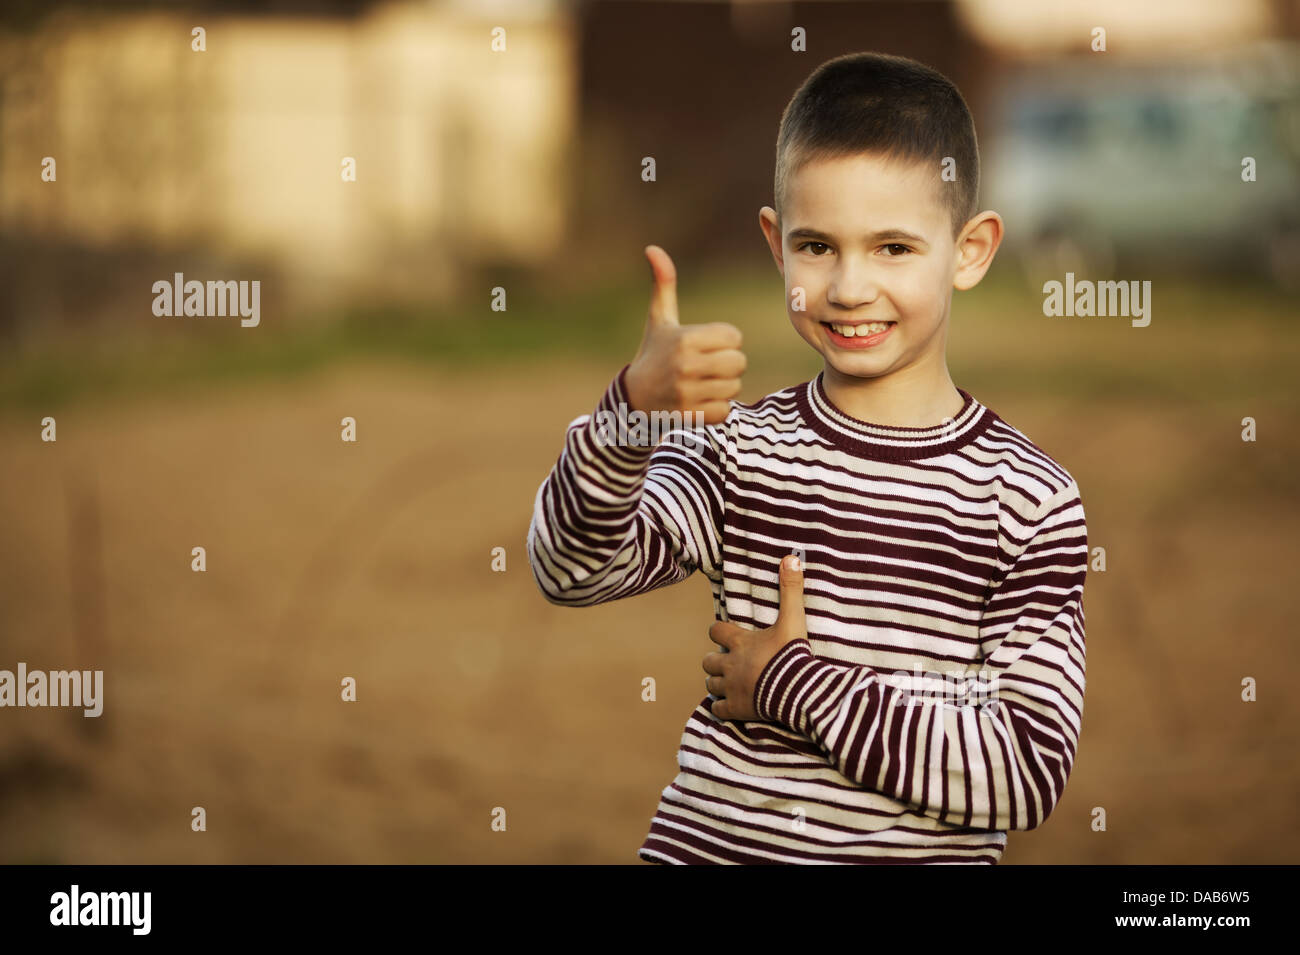 little boy shows thumbs up gesture Stock Photo